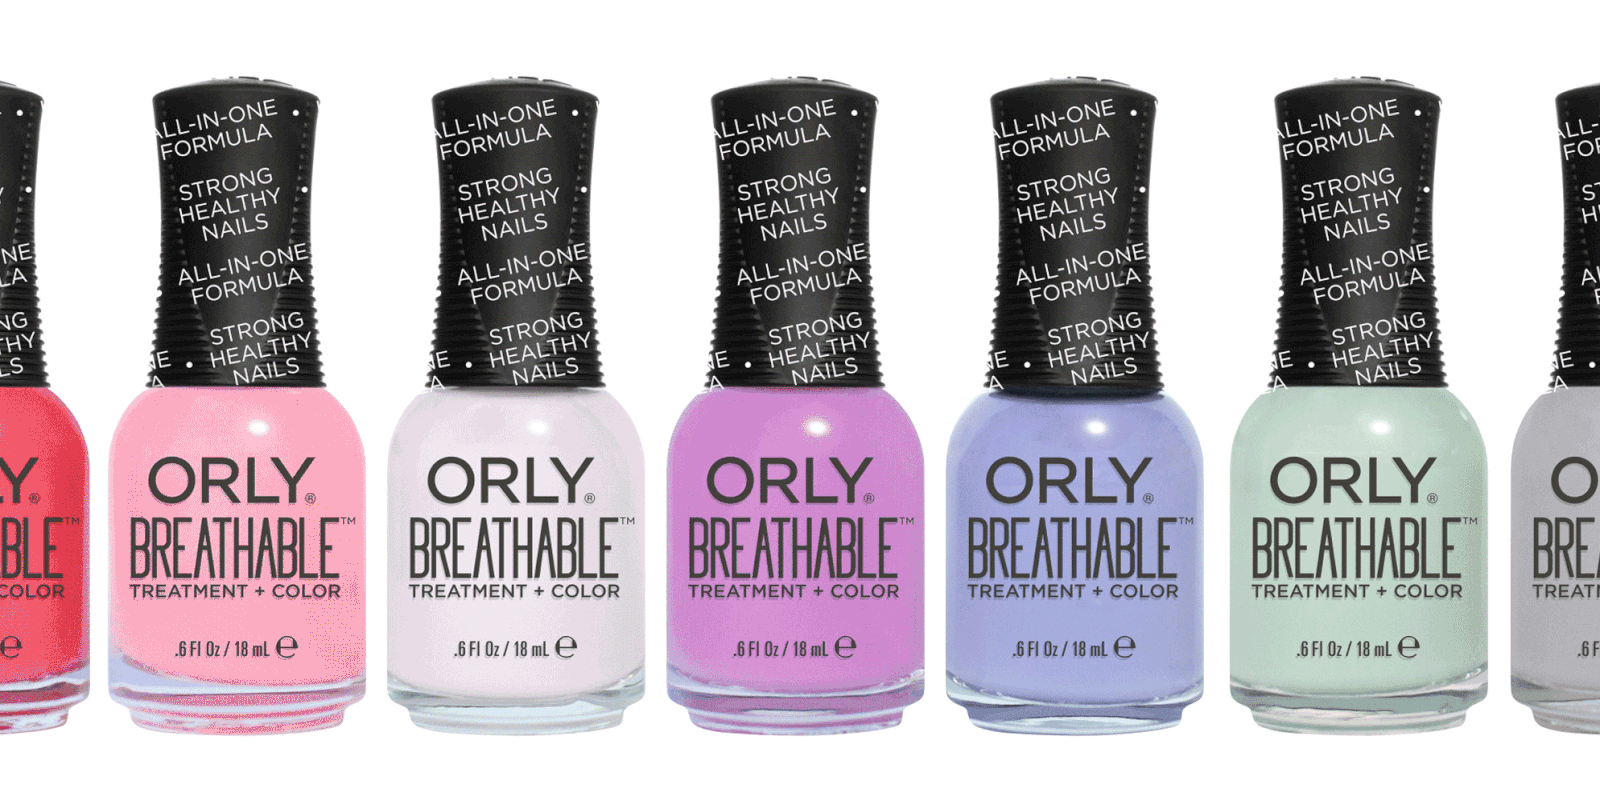 7. "Orly Breathable Treatment + Color in Barely There" - wide 2